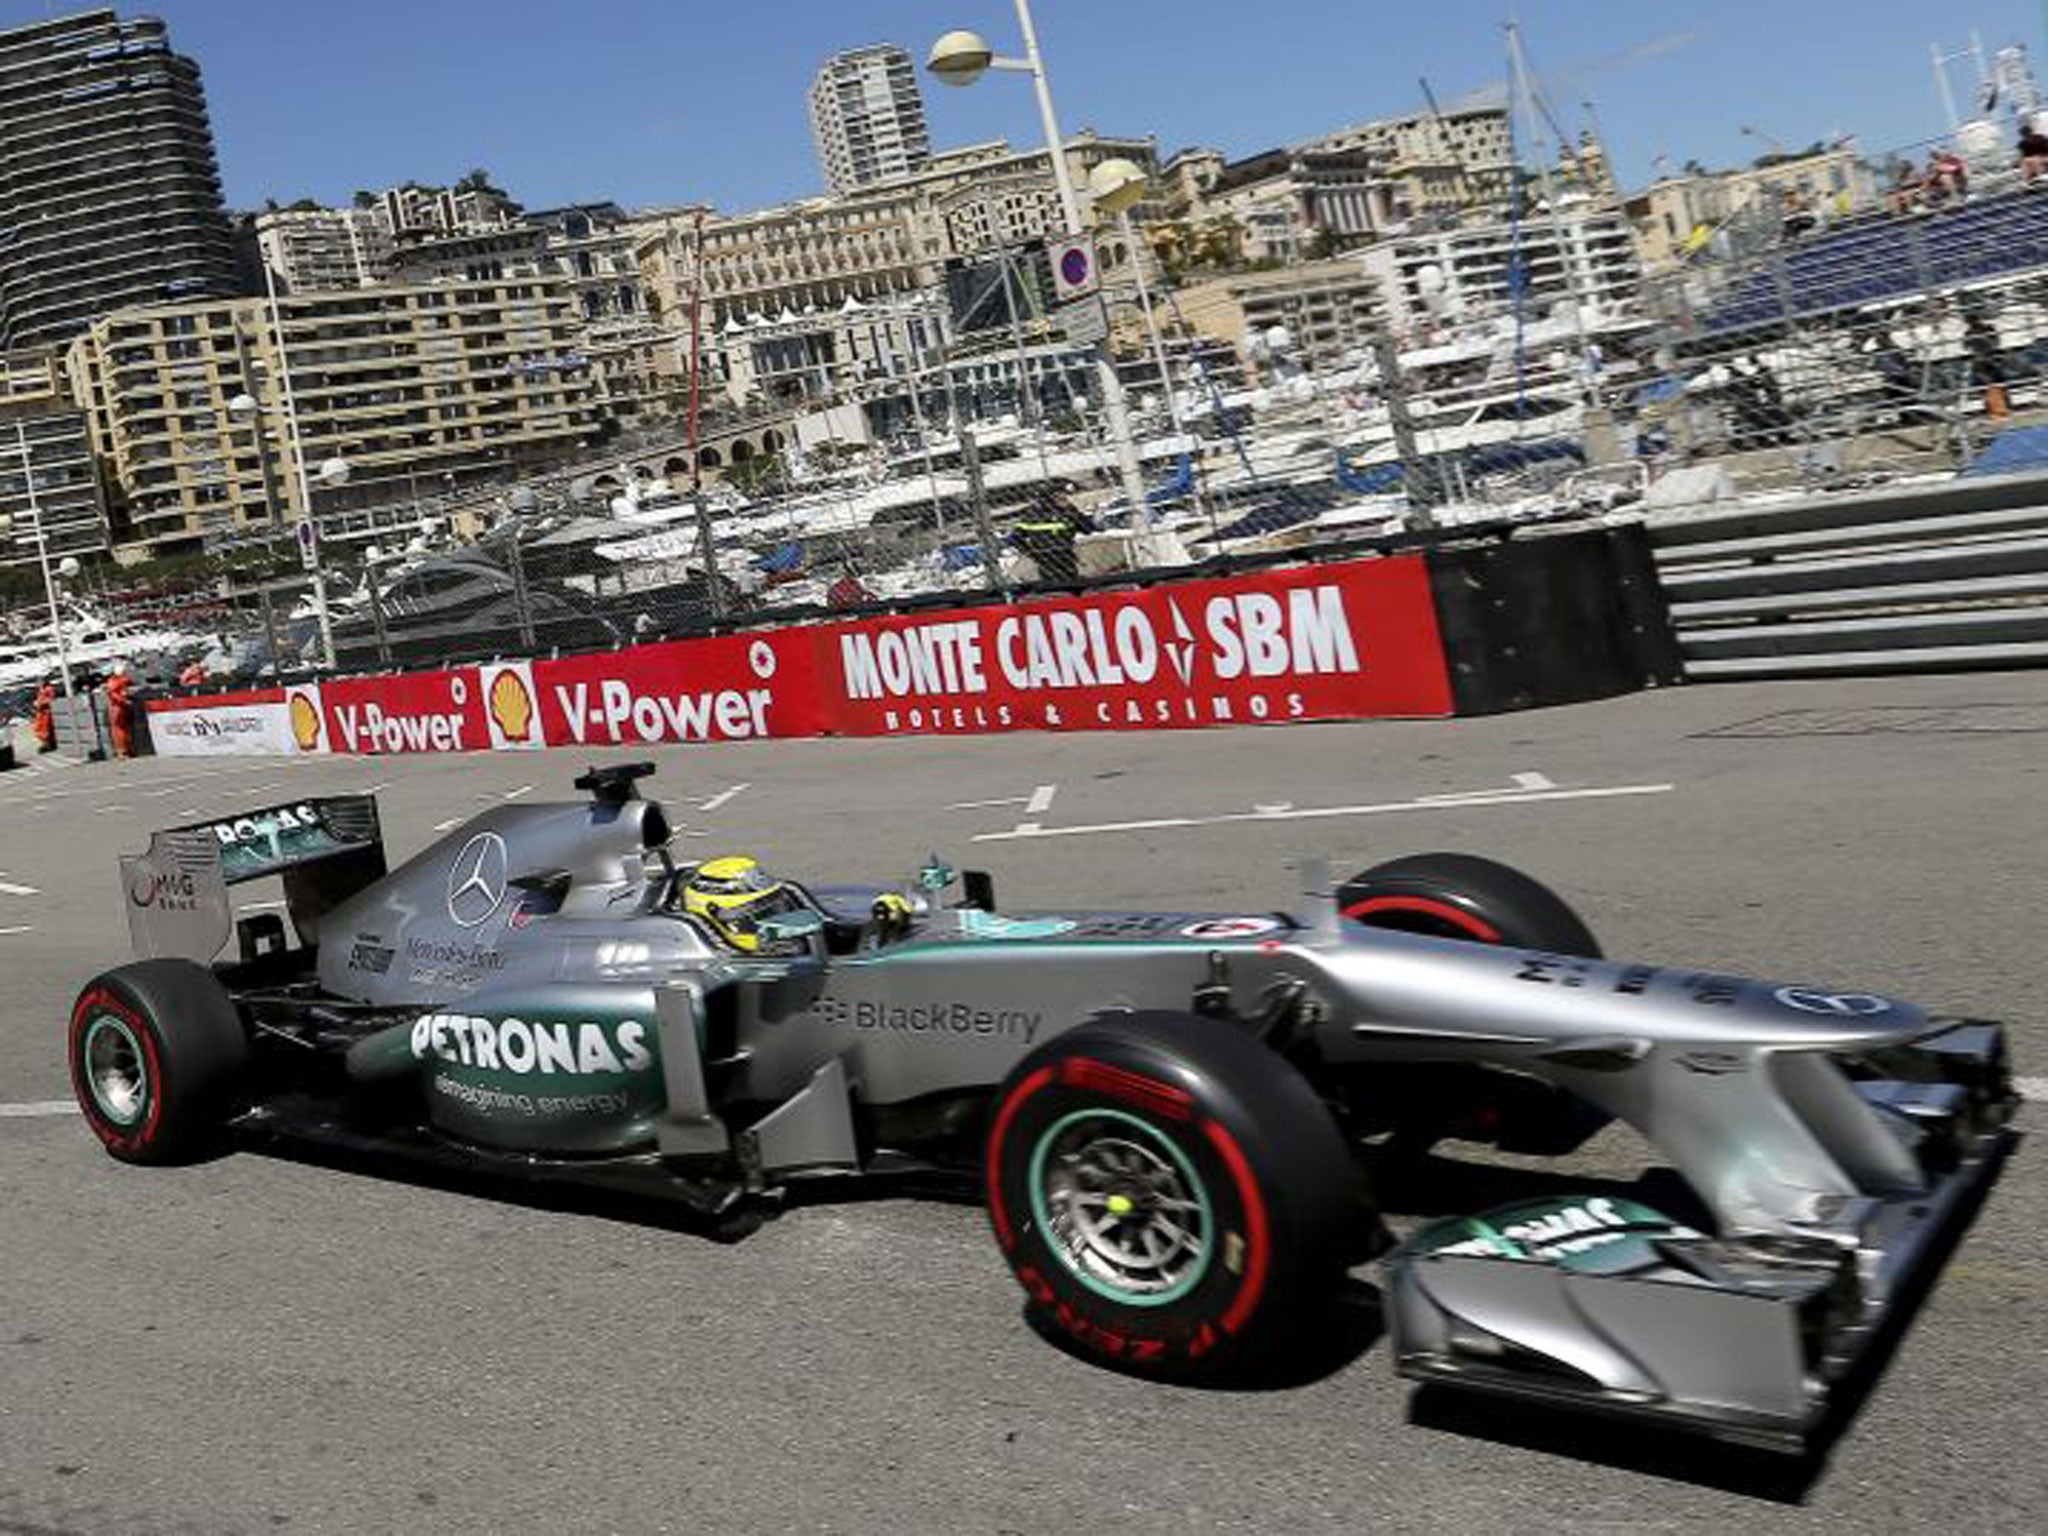 Nico Rosberg
was once again faster than Lewis Hamilton in practice